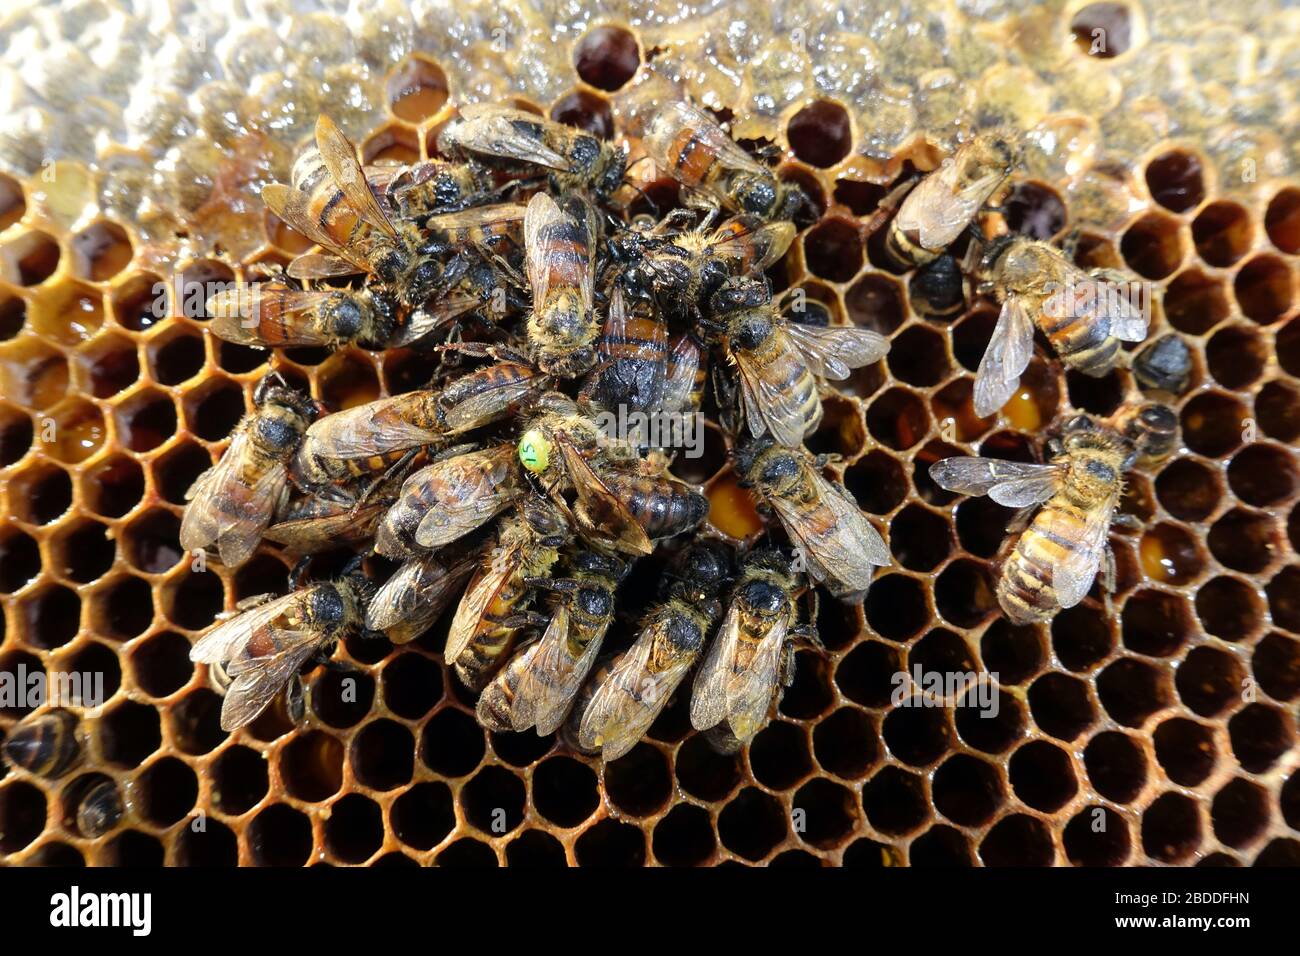 29.12.2019, Berlin, Berlin, Germany - Dead honey bees and drawn queen bee on a brood comb. 00S191229D318CAROEX.JPG [MODEL RELEASE: NOT APPLICABLE, PRO Stock Photo